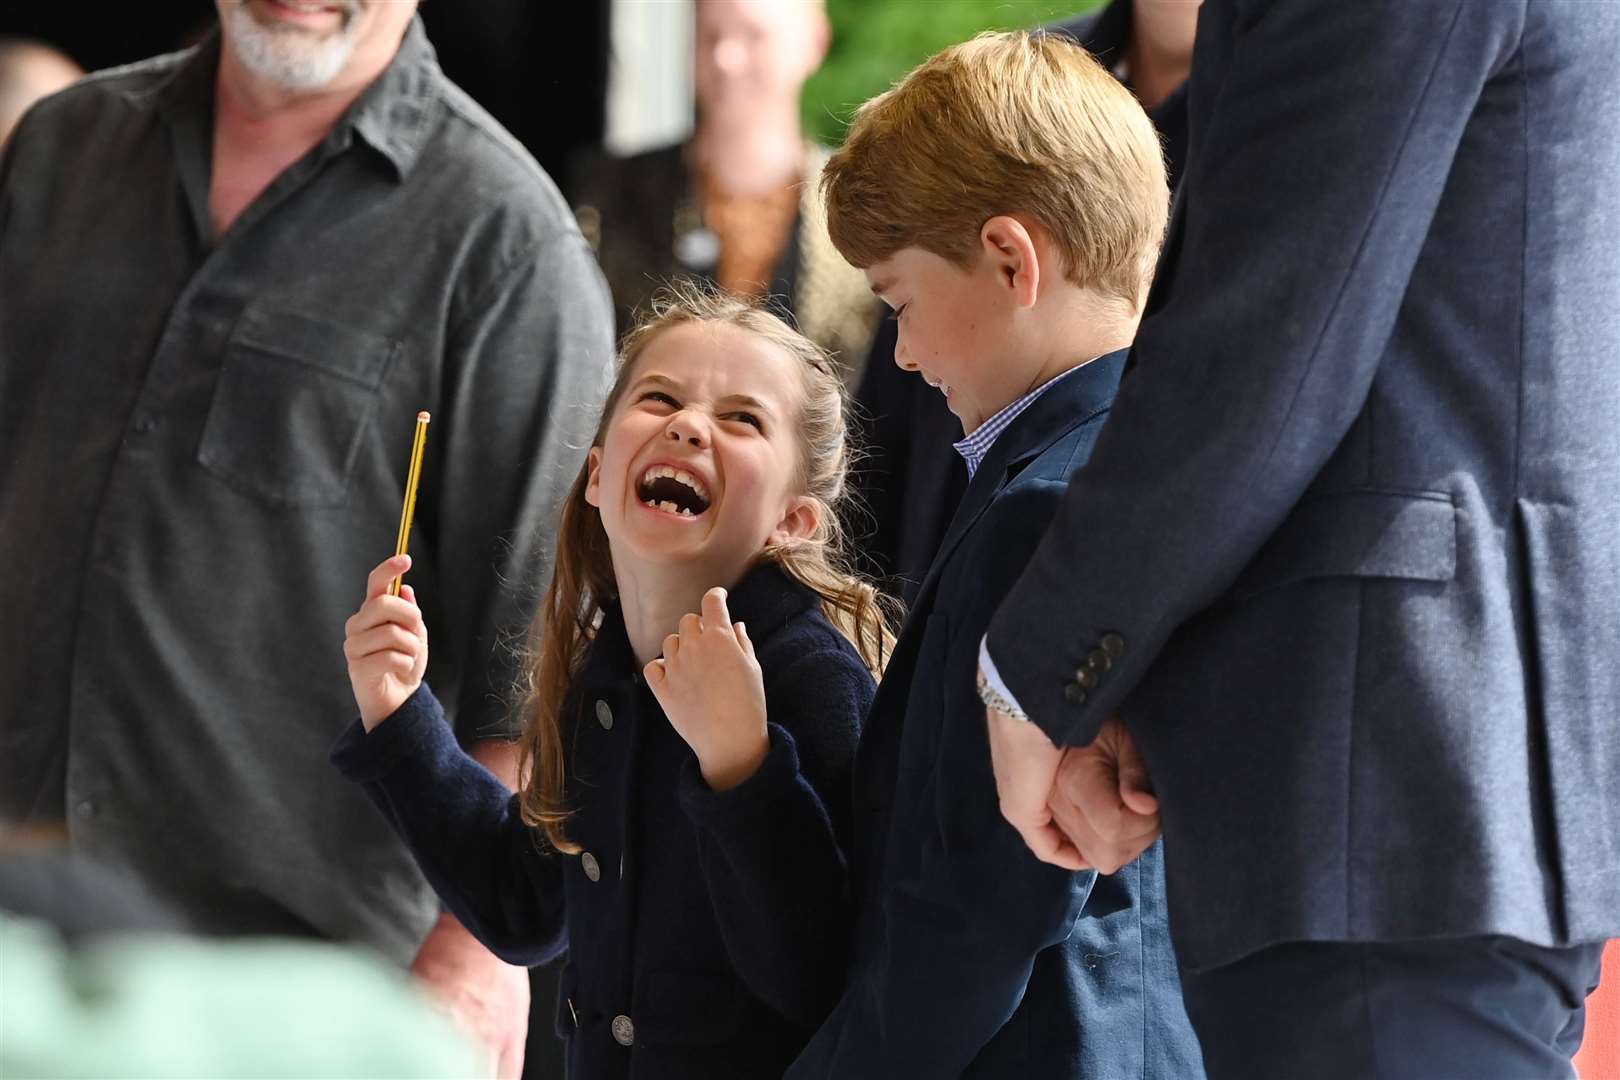 Princess Charlotte laughs as she conducts a band next to her brother, Prince George, during their visit to Cardiff Castle to meet performers and crew involved in the special Platinum Jubilee Celebration Concert taking place in the castle grounds later in the afternoon (Ashley Crowden/PA)